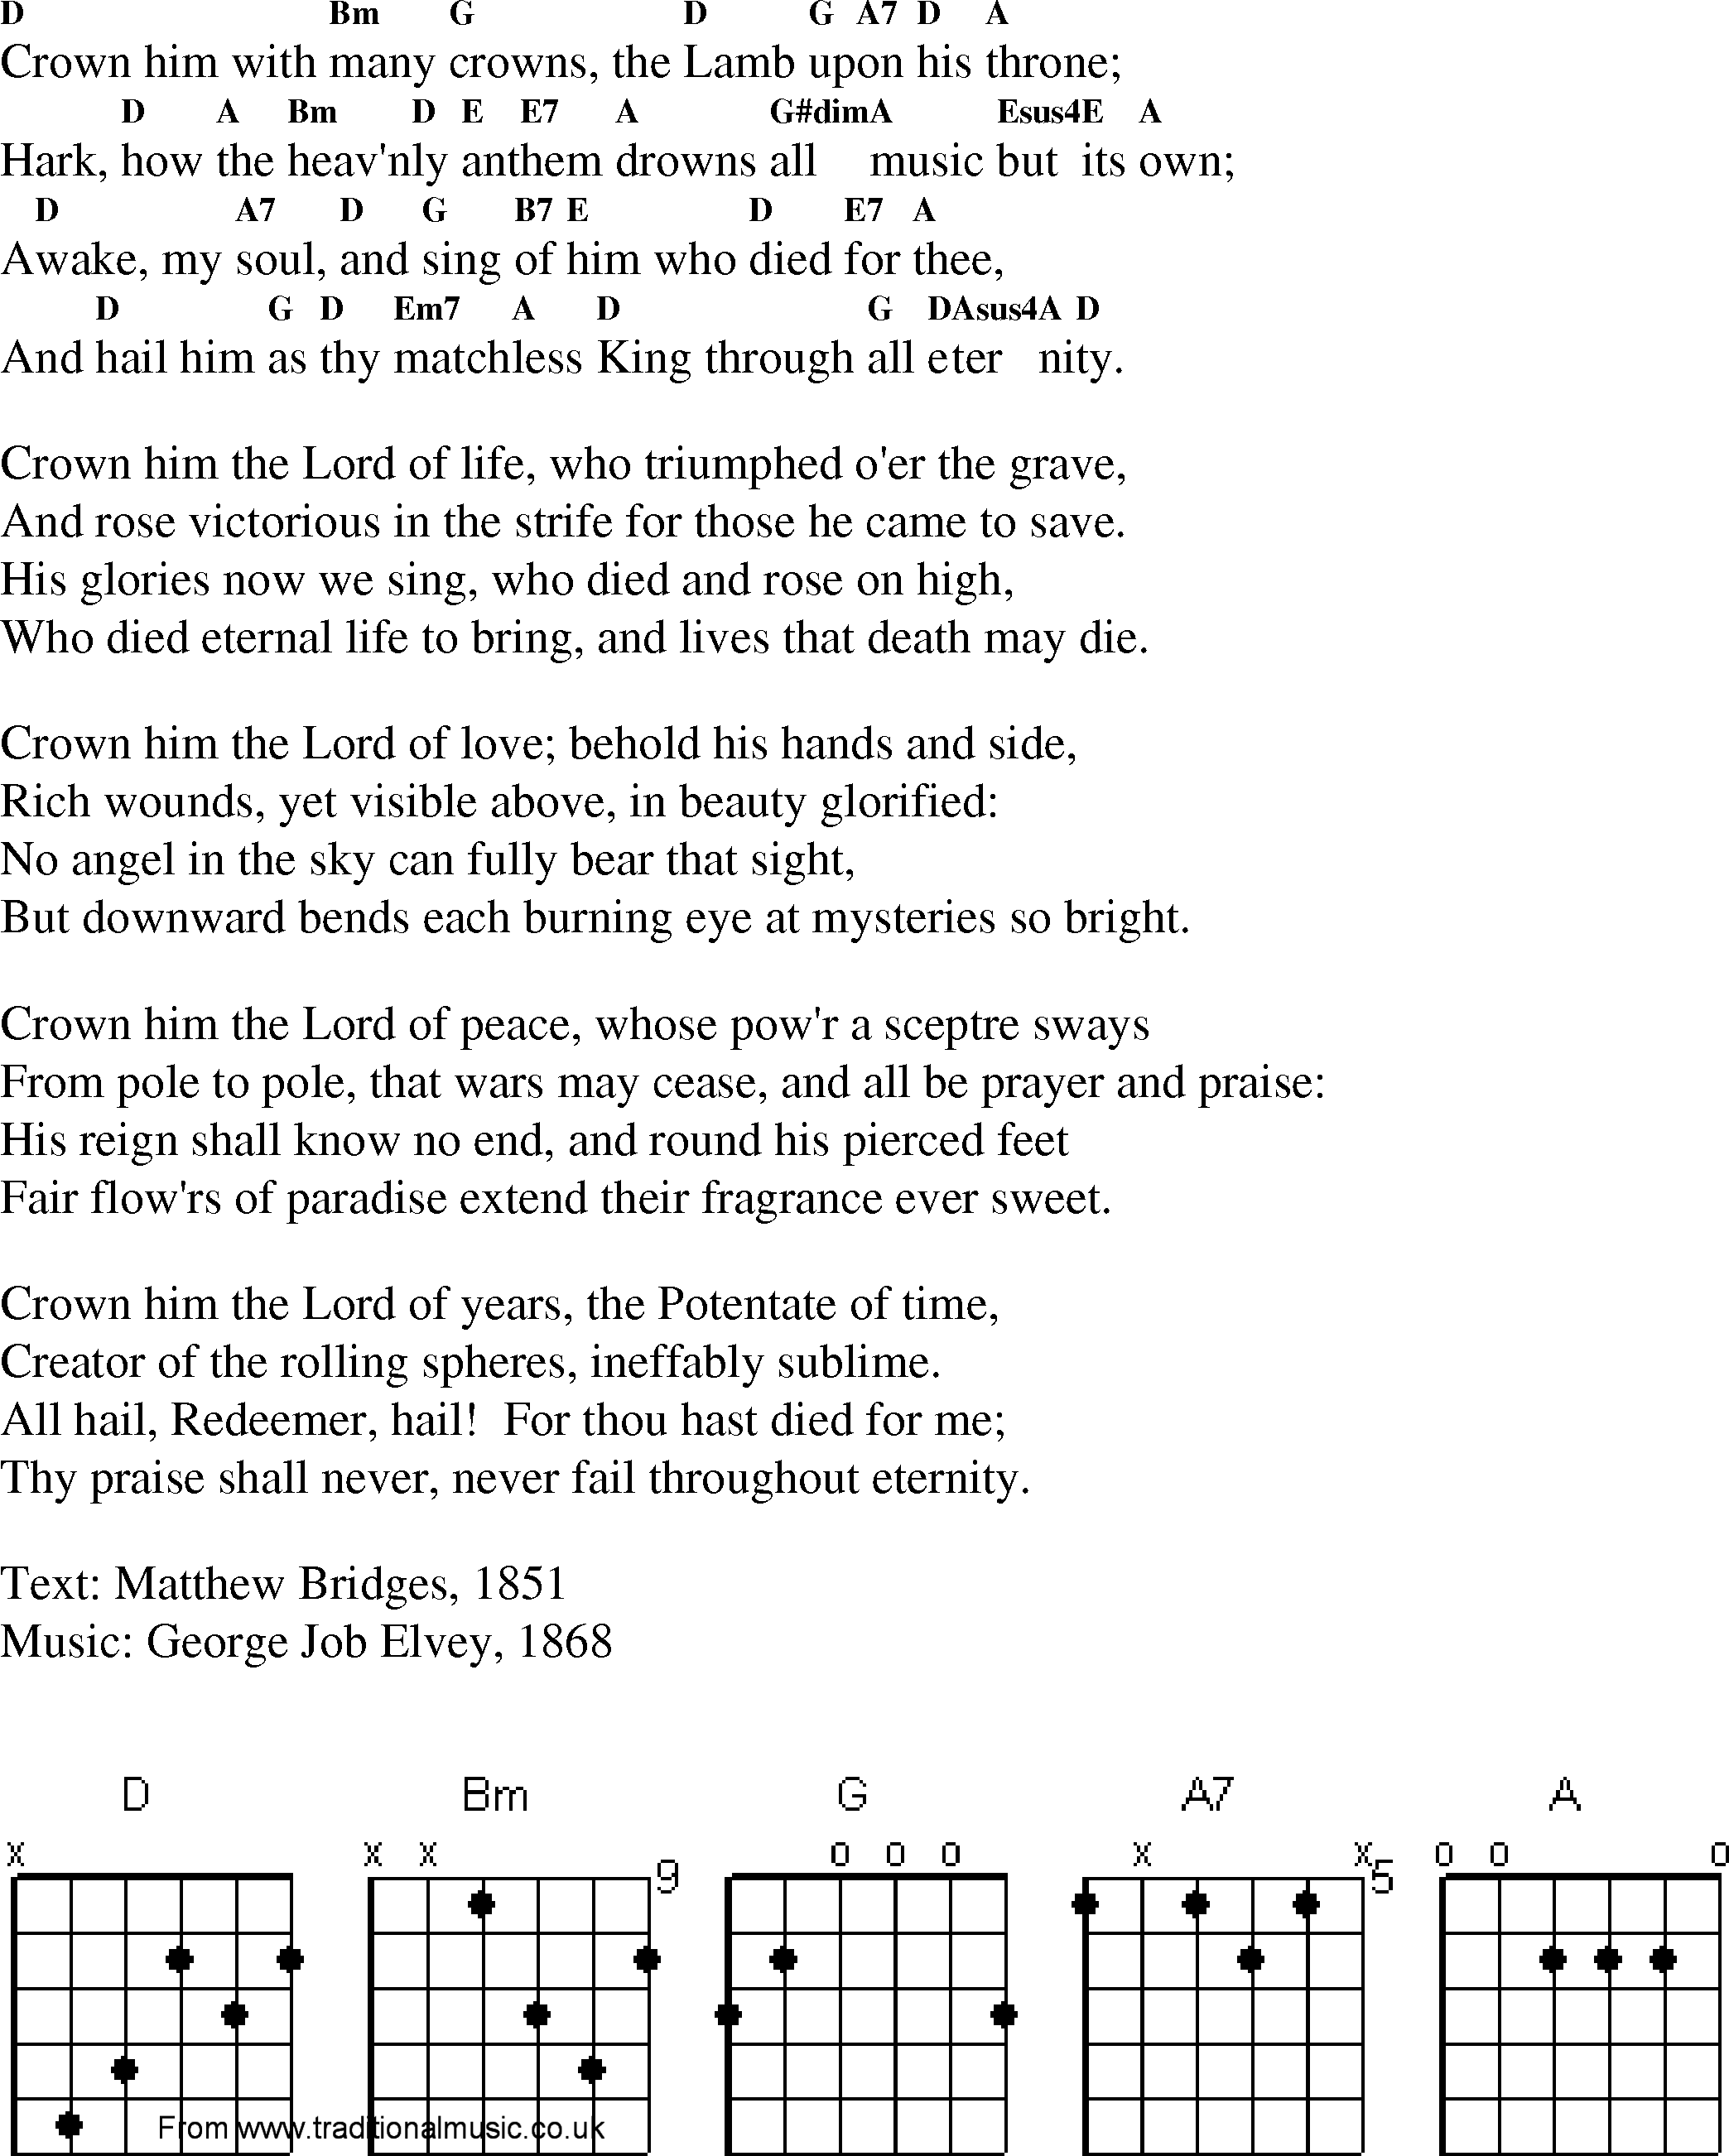 Gospel Song: crown_him_with_many_crowns, lyrics and chords.